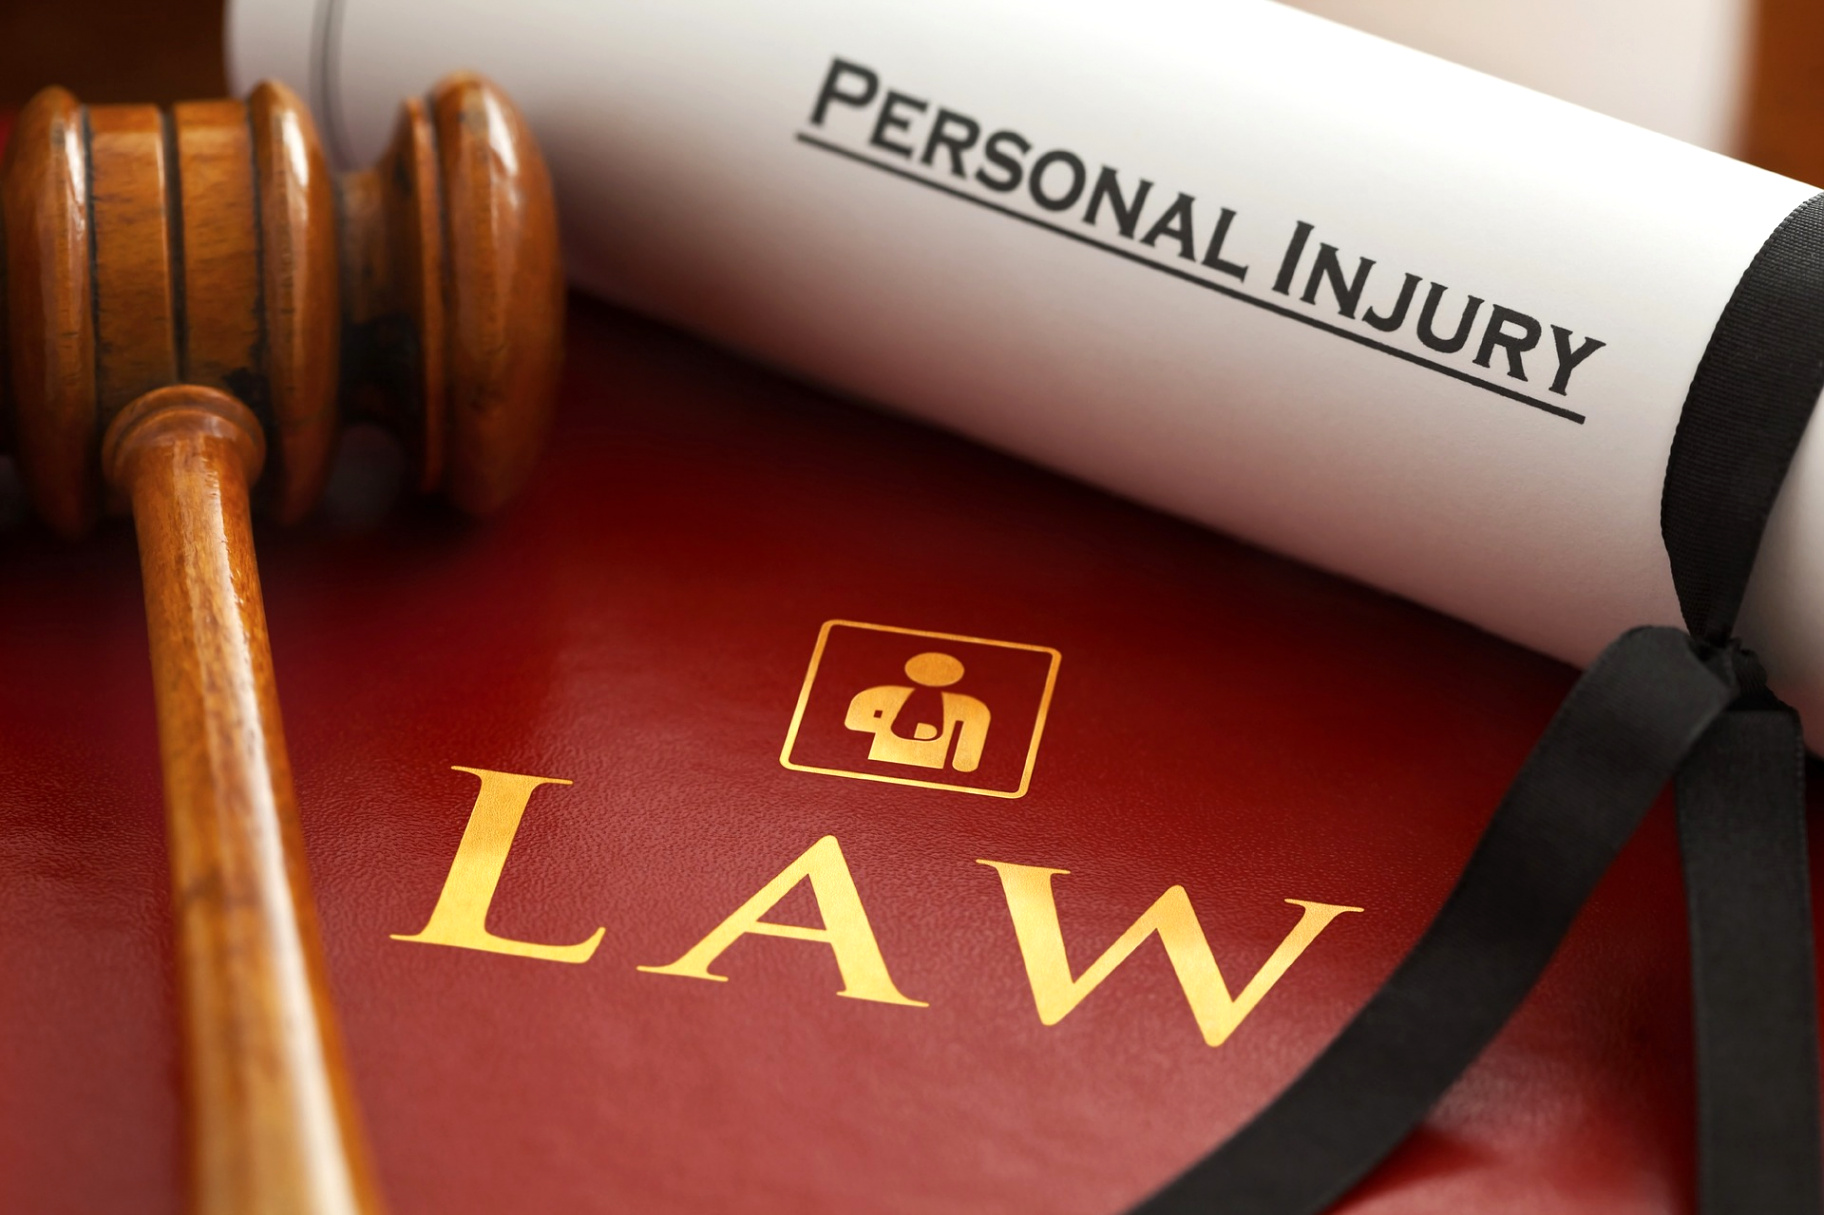 statute of limitations for personal injuries in new jersey